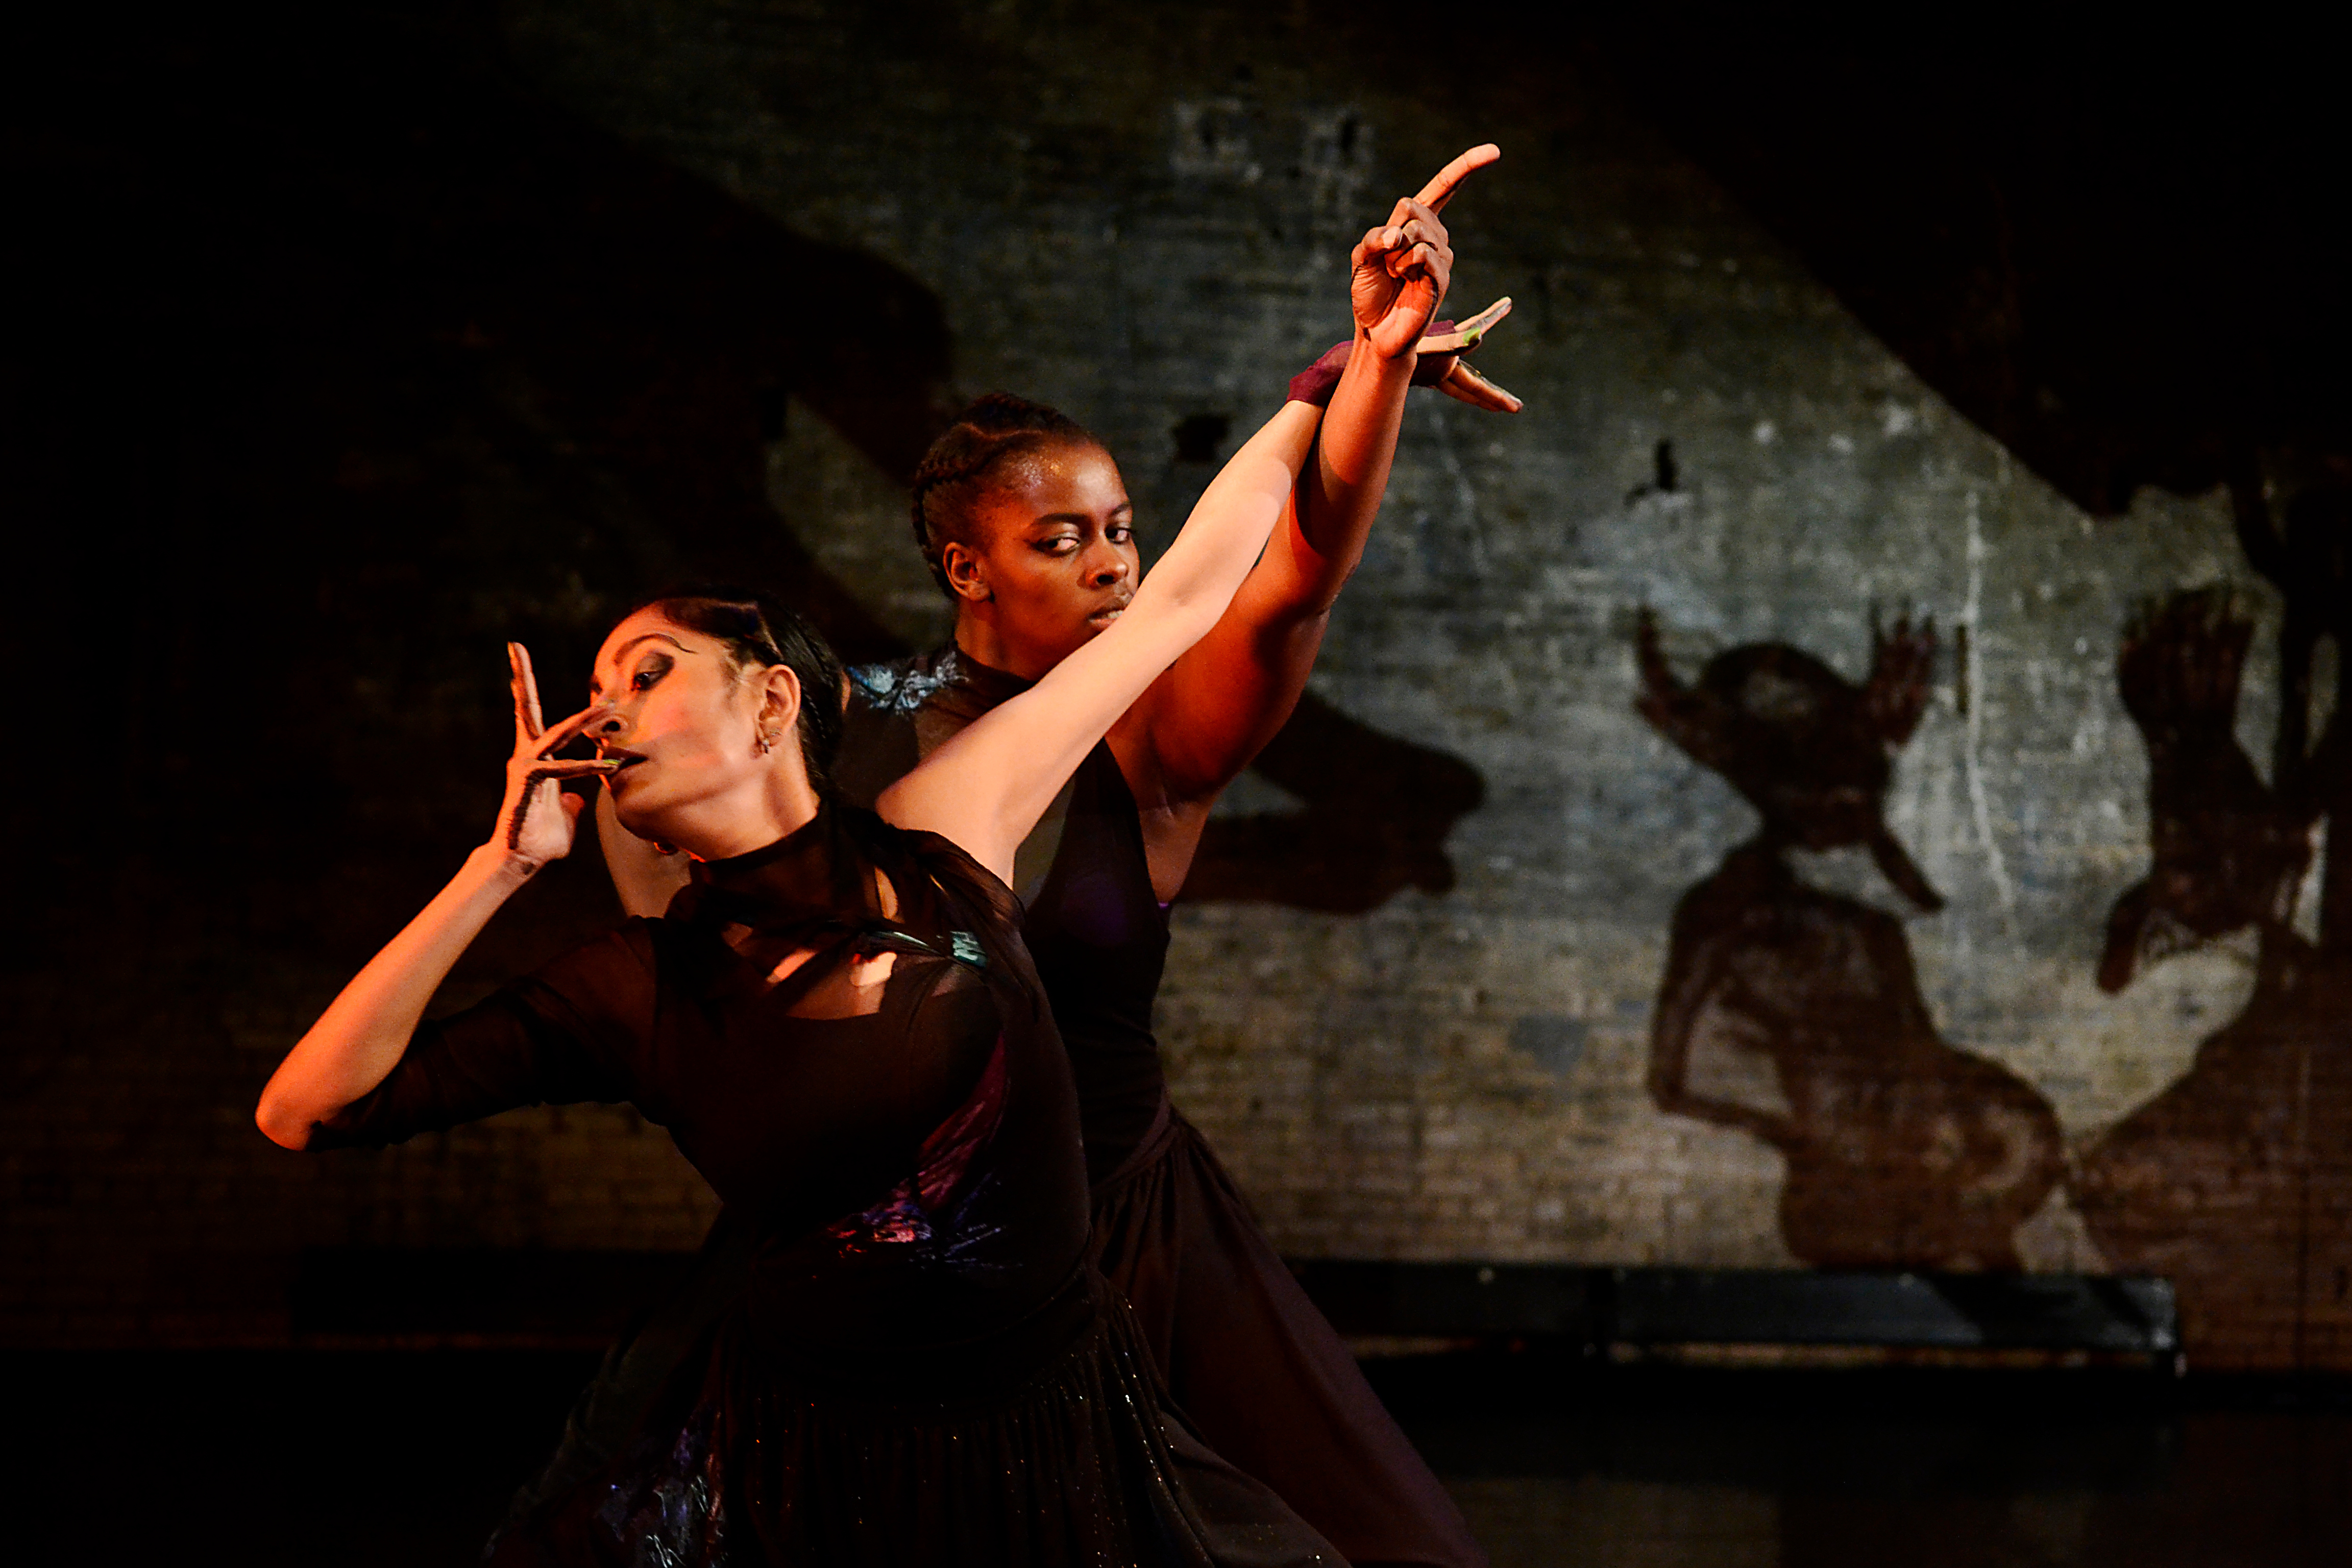 Tdwo female dancers posing together; one standing in front of the other, both in dark attire and on a dark stage setting.